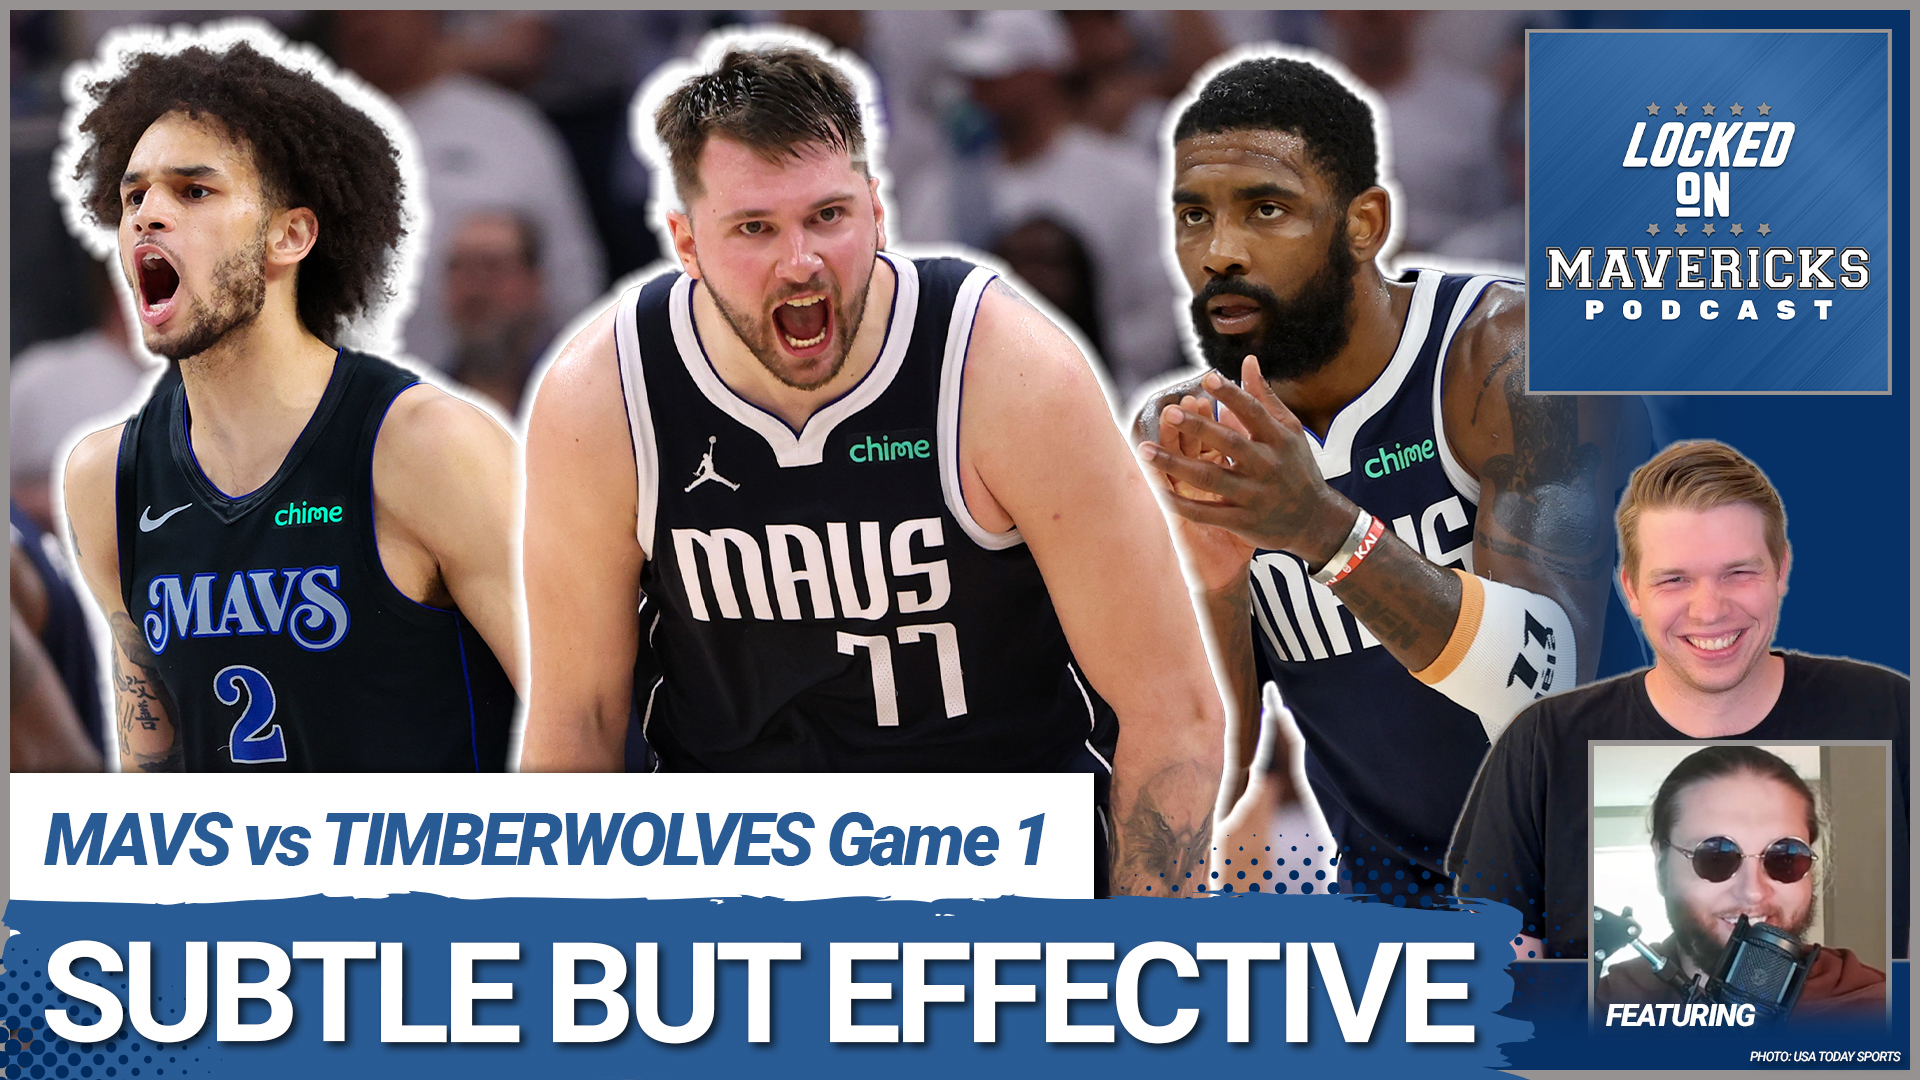 Nick Angstadt & Slightly Biased breakdown the Dallas Mavericks Game 1 win against the Minnesota Timberwolves. How did Luka Doncic lead the way,